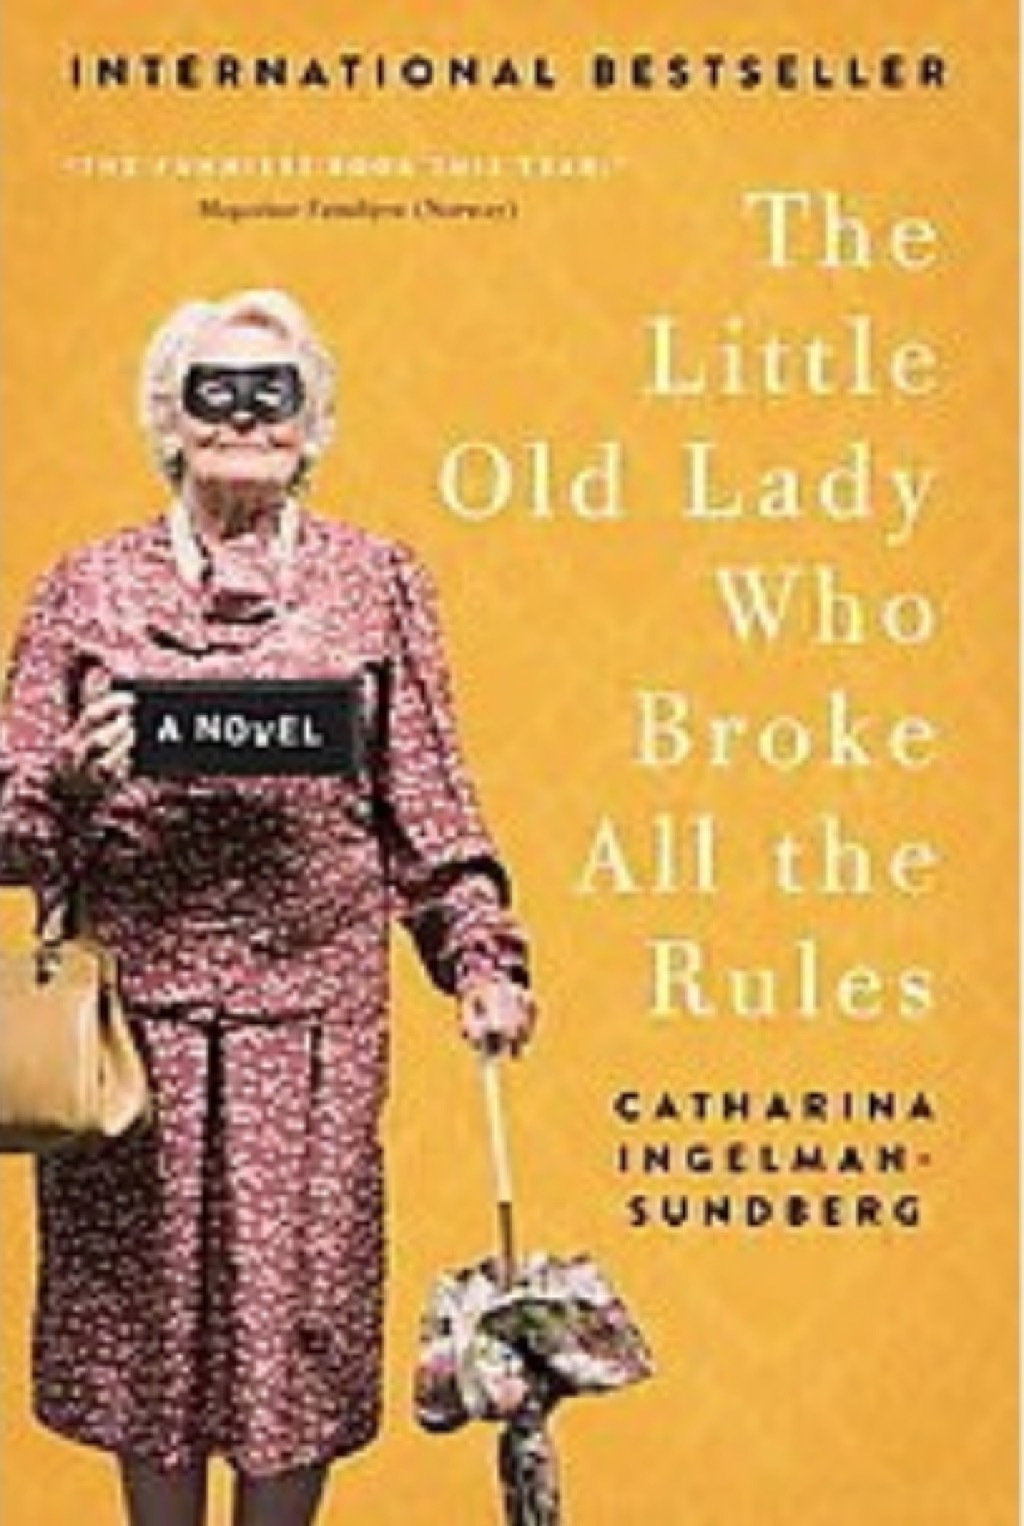 The Little Old Lady Who Broke All The Rules by Catherina Ingelman-Sunderberg 